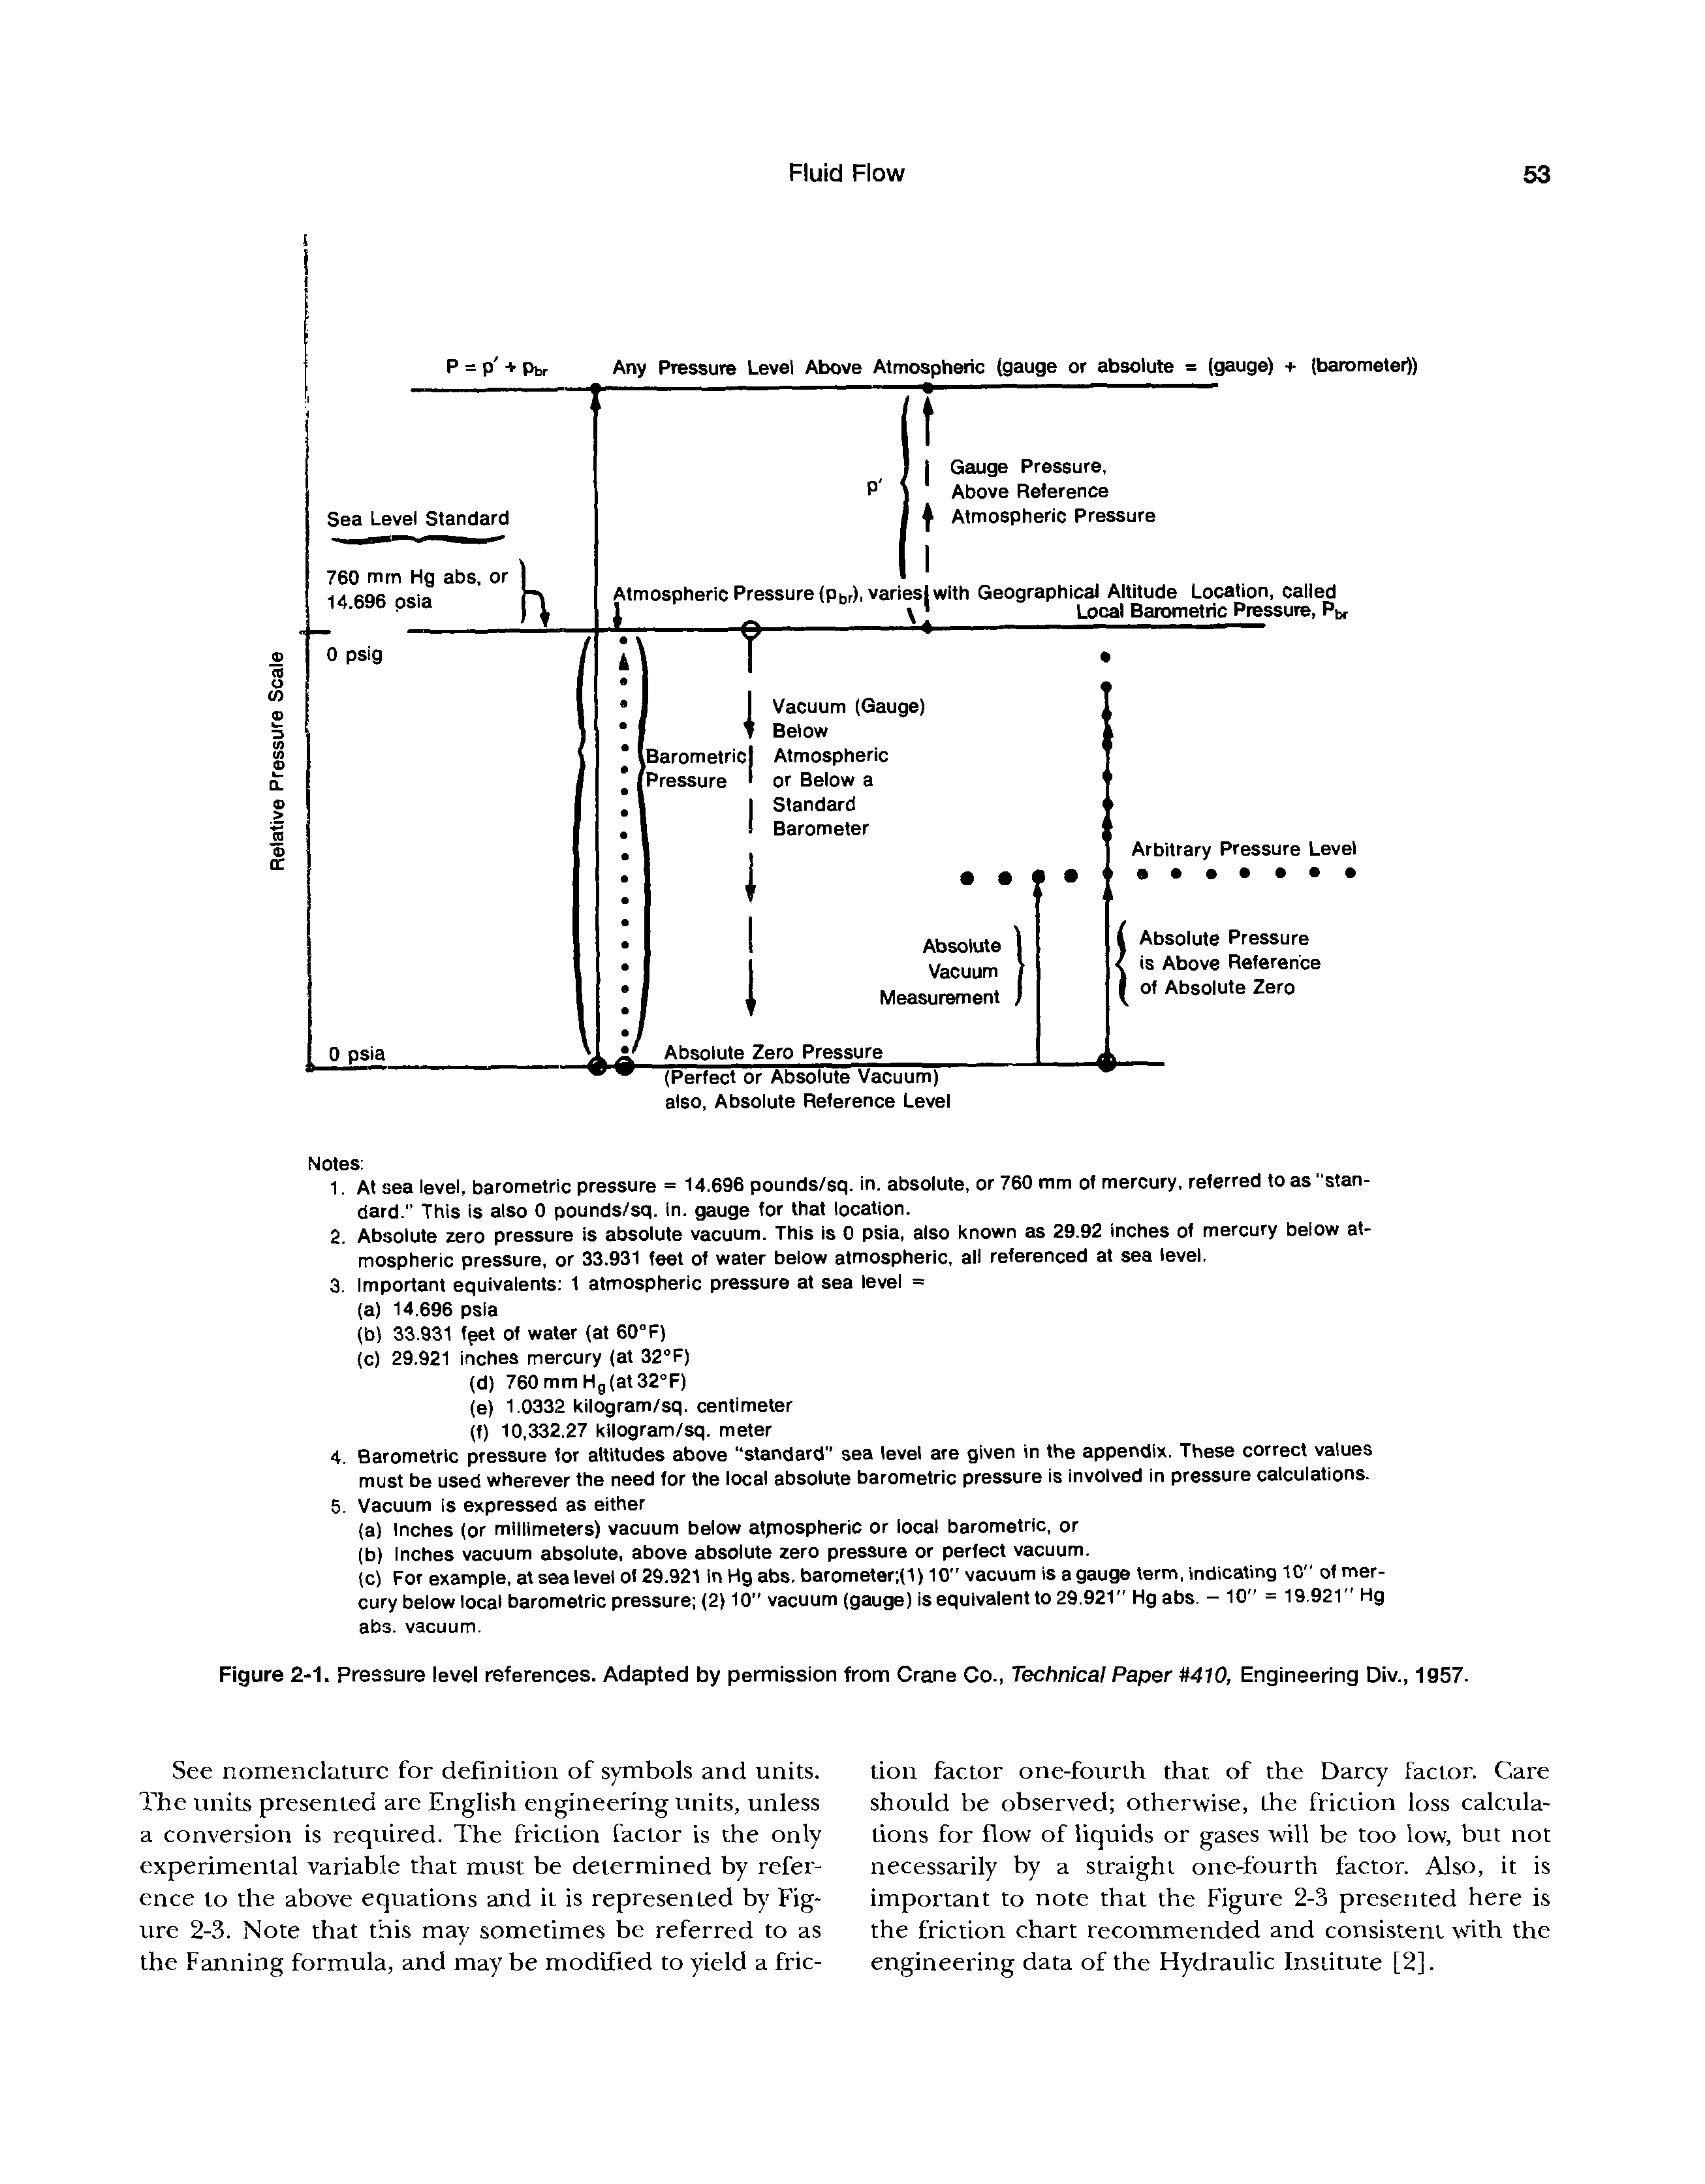 Figure 2-1. Pressure level references. Adapted by permission from Crane Co., Technical Paper U410, Engineering Div., 1957.